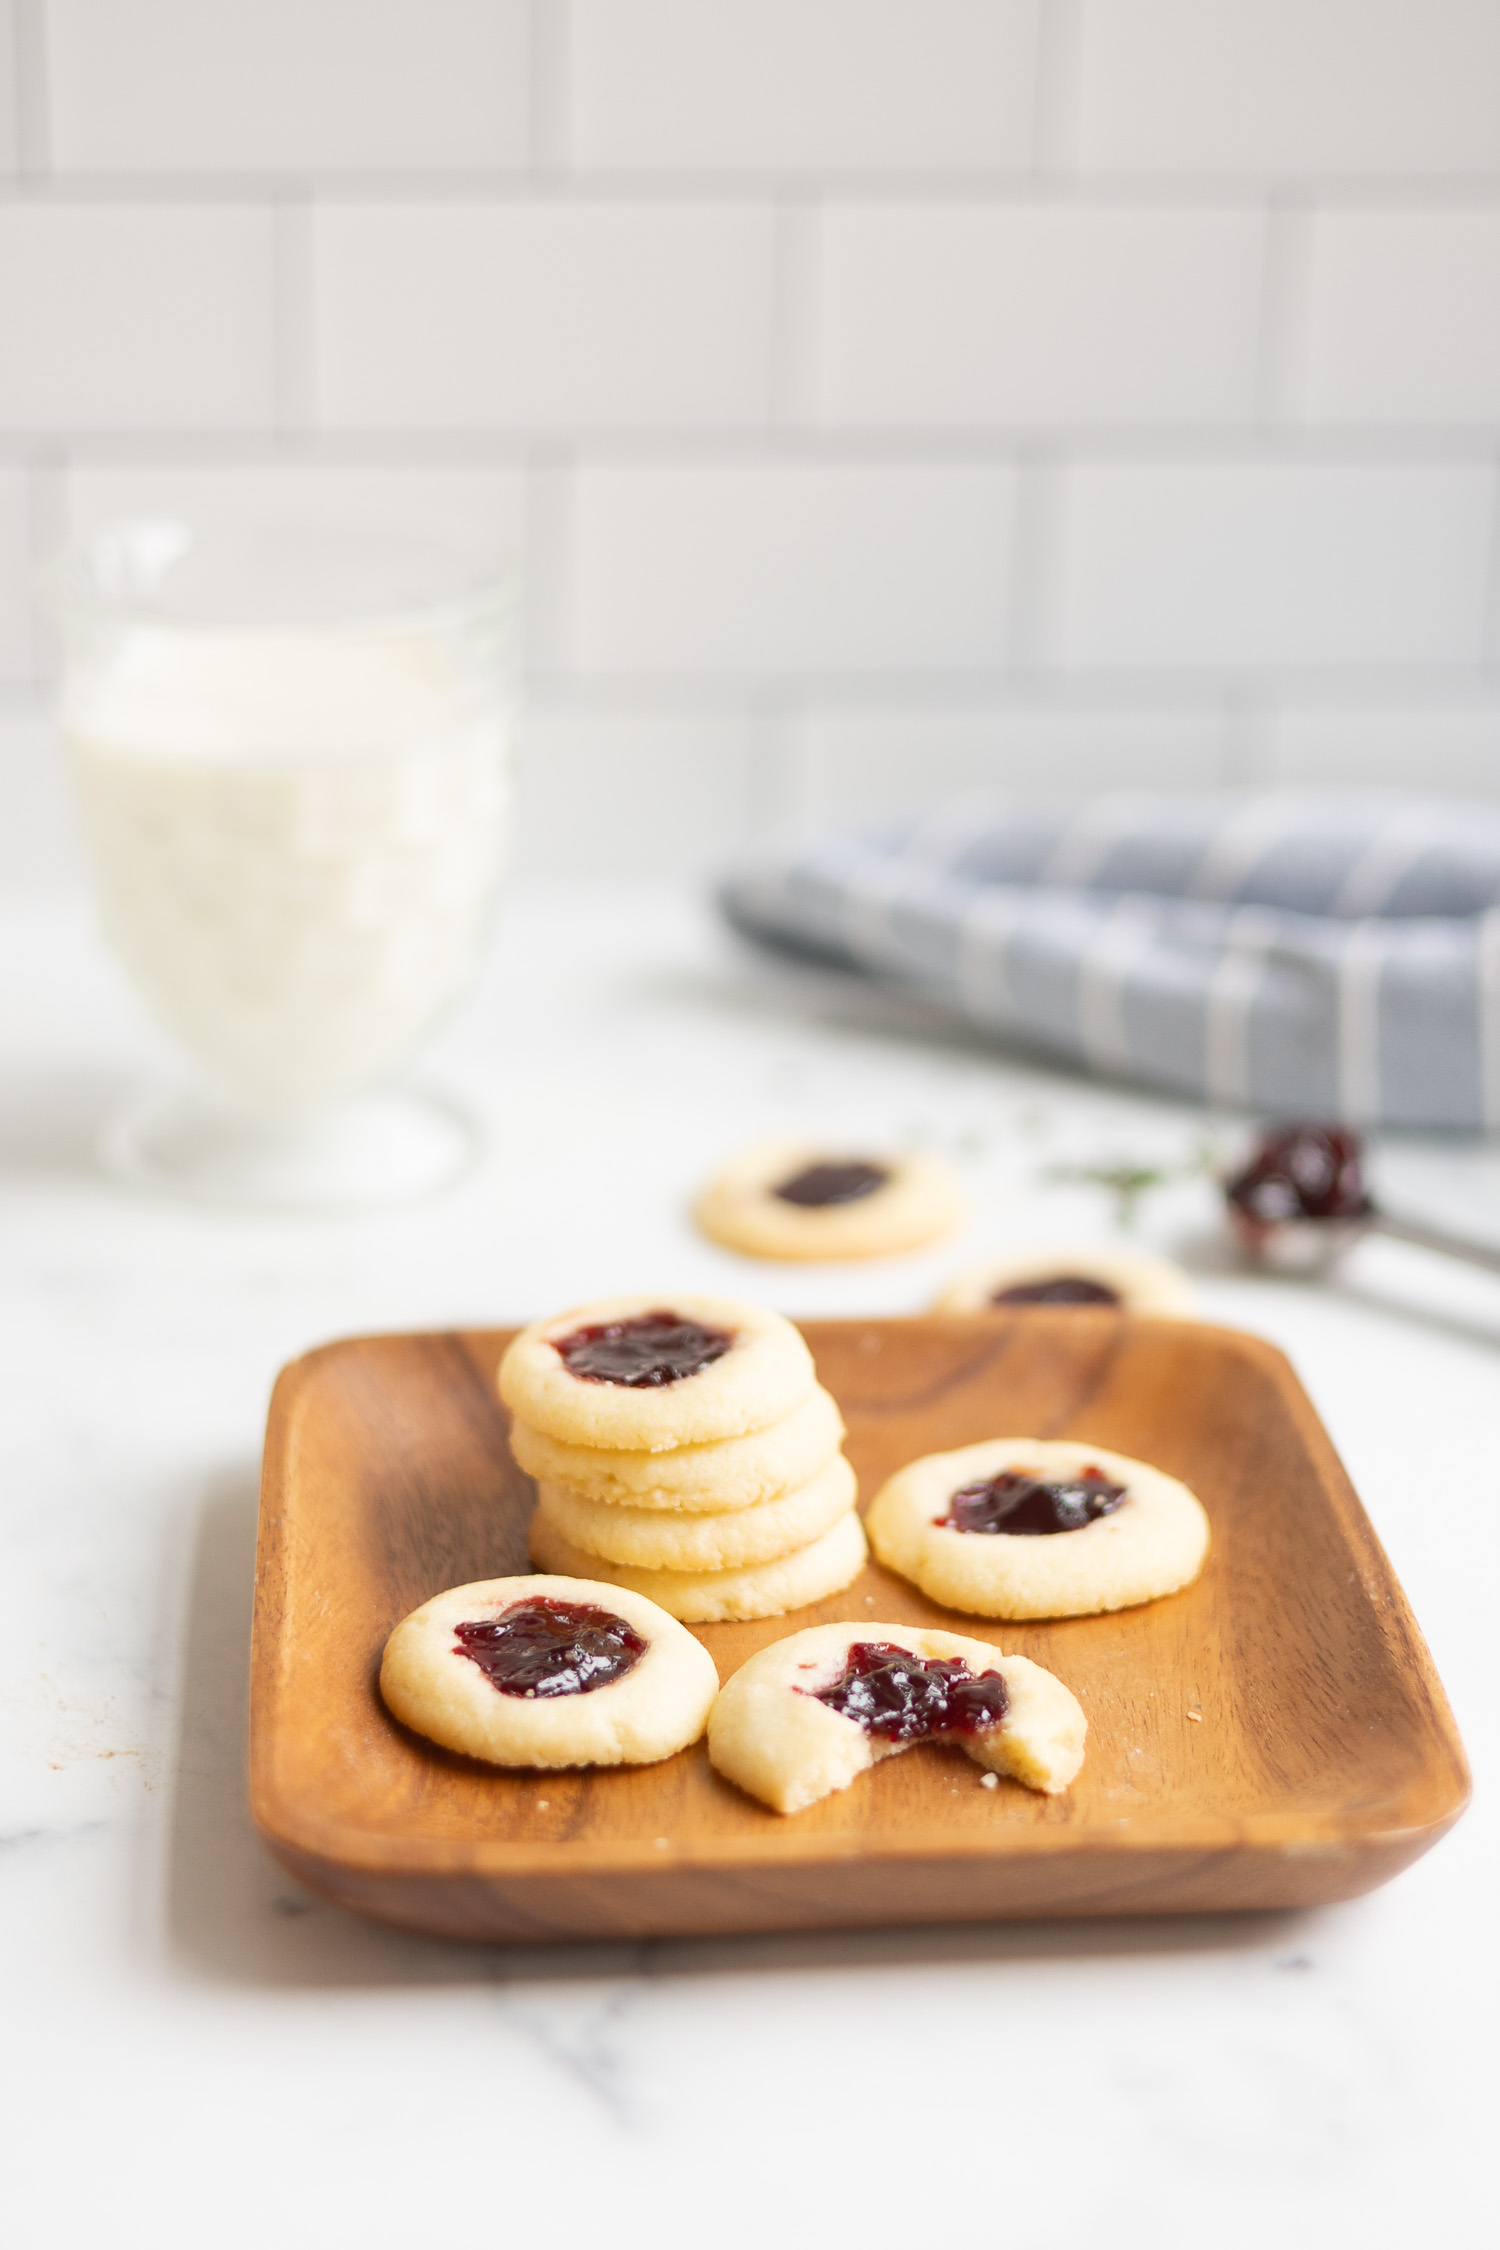 Thumbprint cookies on wood tray with glass of milk